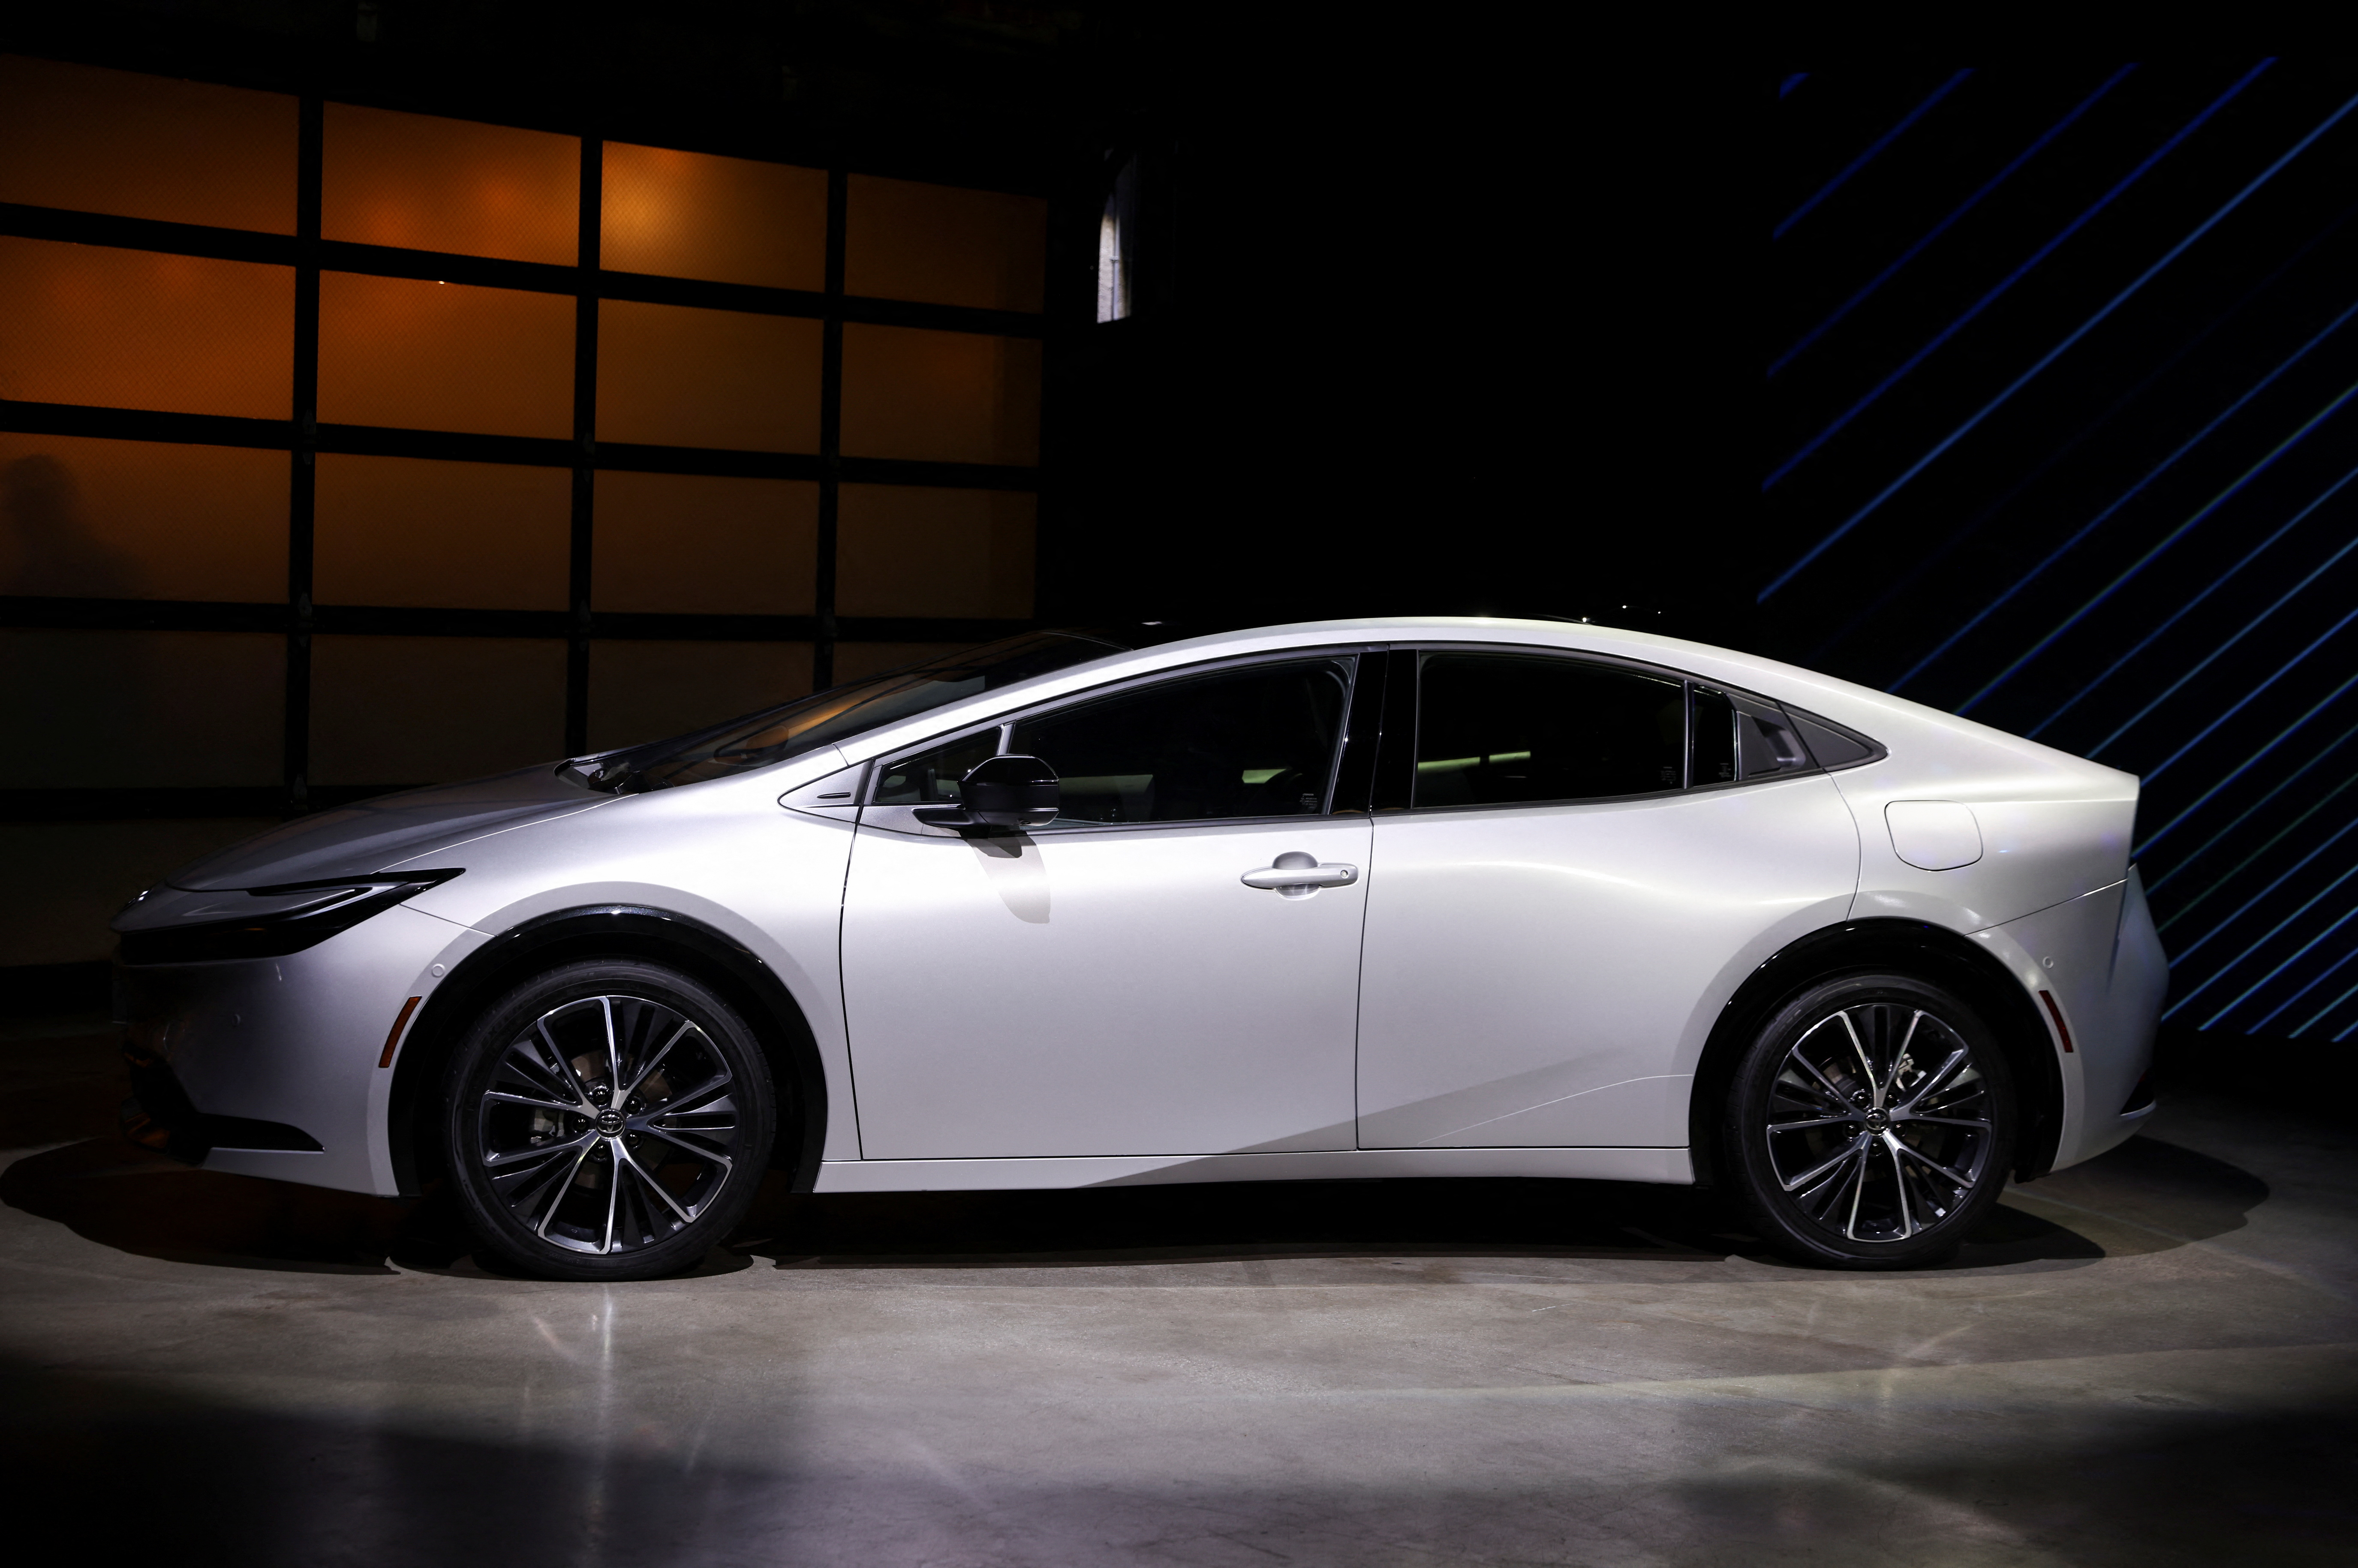 Japanese automaker Toyota unveils the newly redesigned 2023 Prius prior to the start of the Los Angeles Auto Show